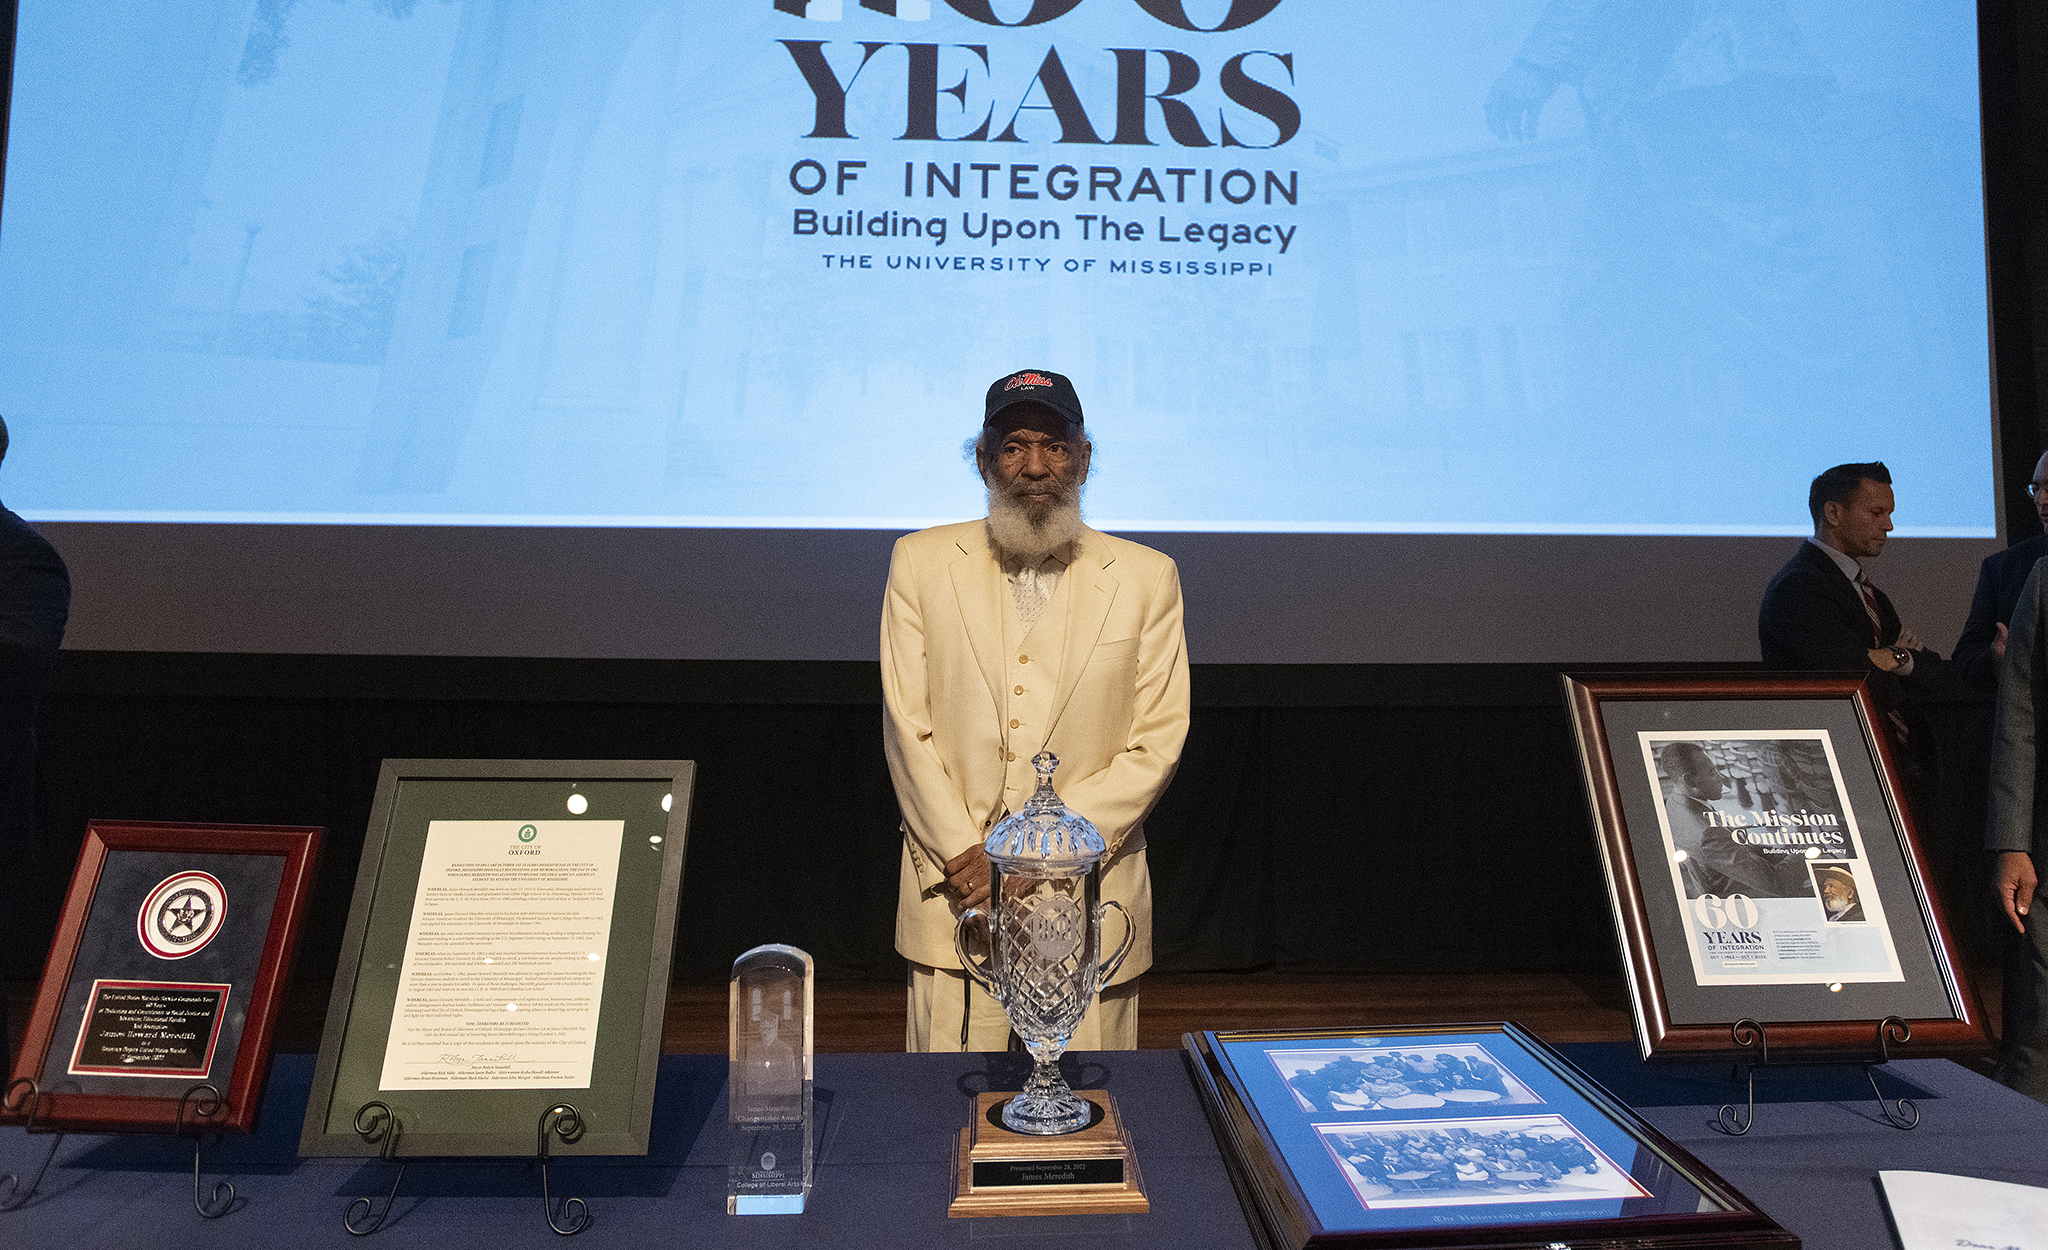 James Meredith shows off the numerous awards and recognitions presented to him Wednesday (Sept. 28) during ‘The Mission Continues: Building Upon the Legacy,’ the signature event commemorating the 60th anniversary of his enrollment at the University of Mississippi. Photo by Thomas Graning/Ole Miss Digital Imaging Services